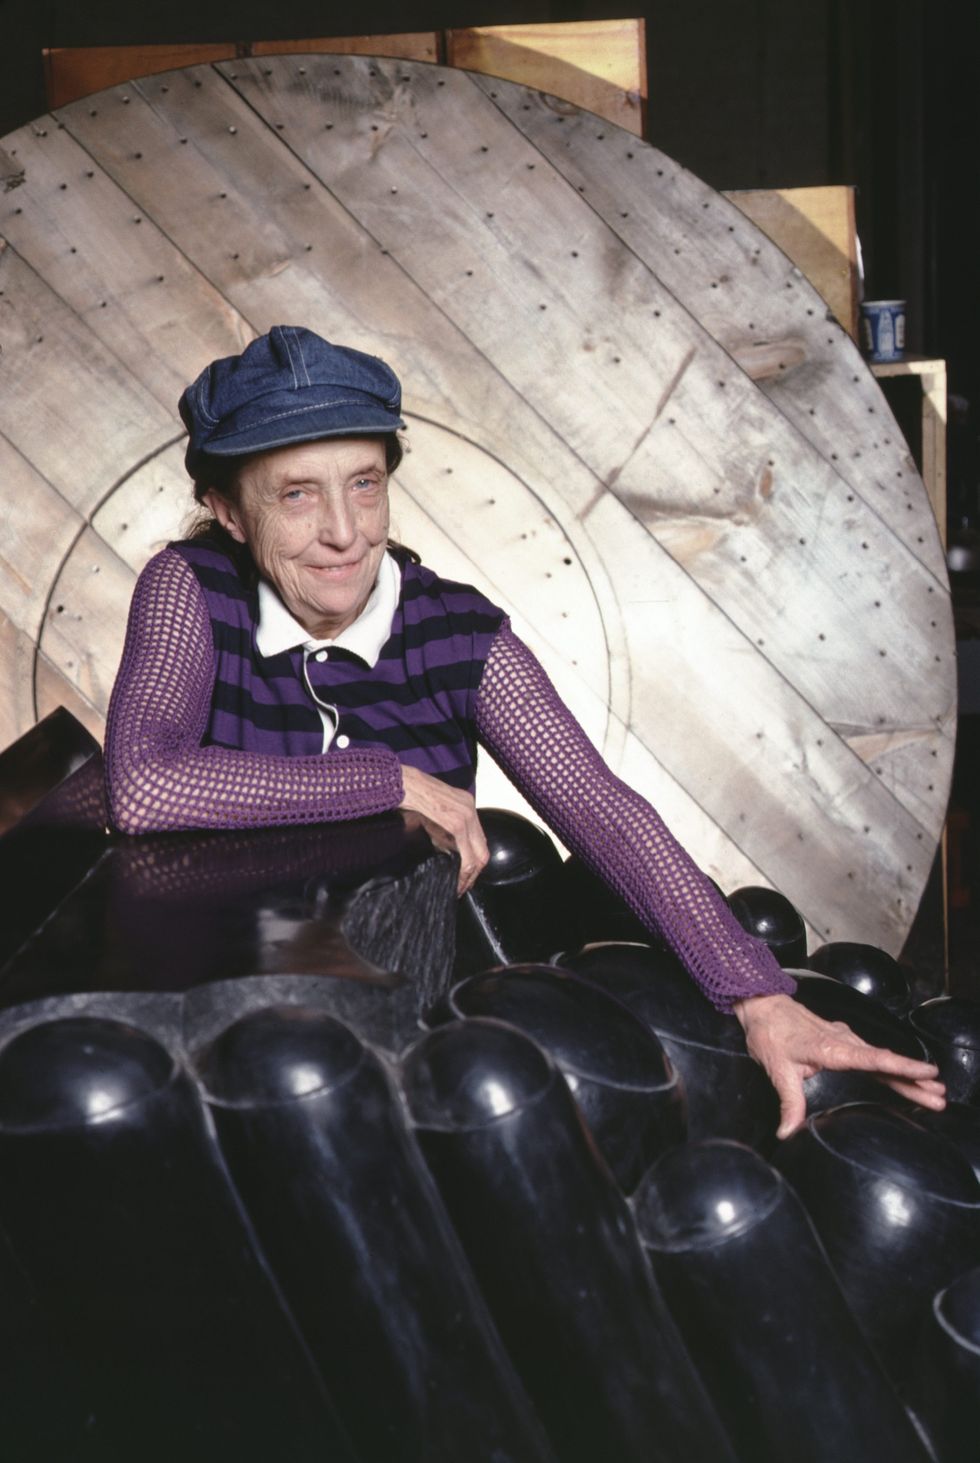 Sculptor Louise Bourgeois